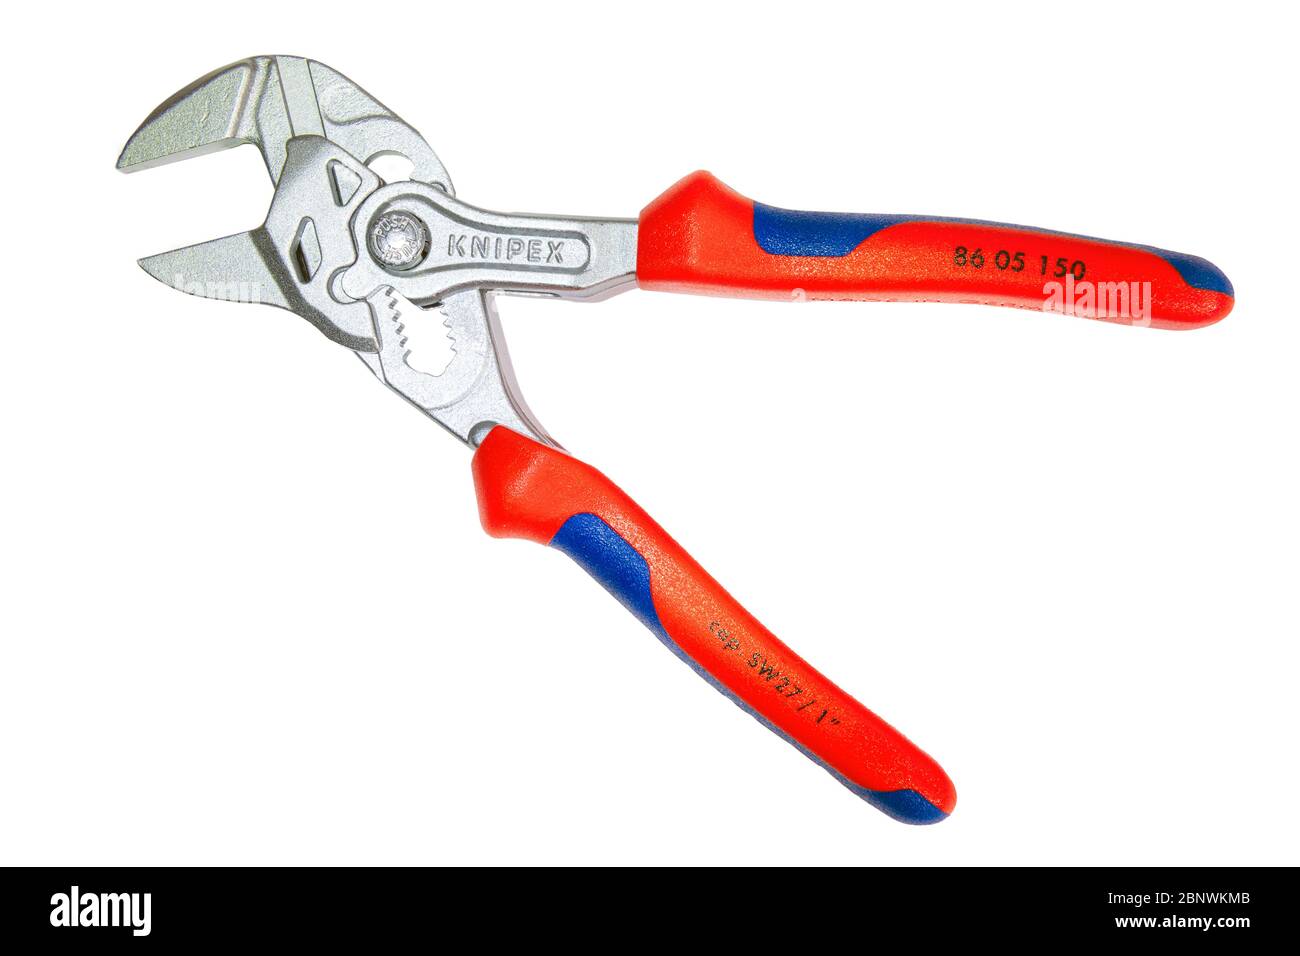 Knipex adjustable wrench pliers cut out or isolated on a white background, UK. Stock Photo